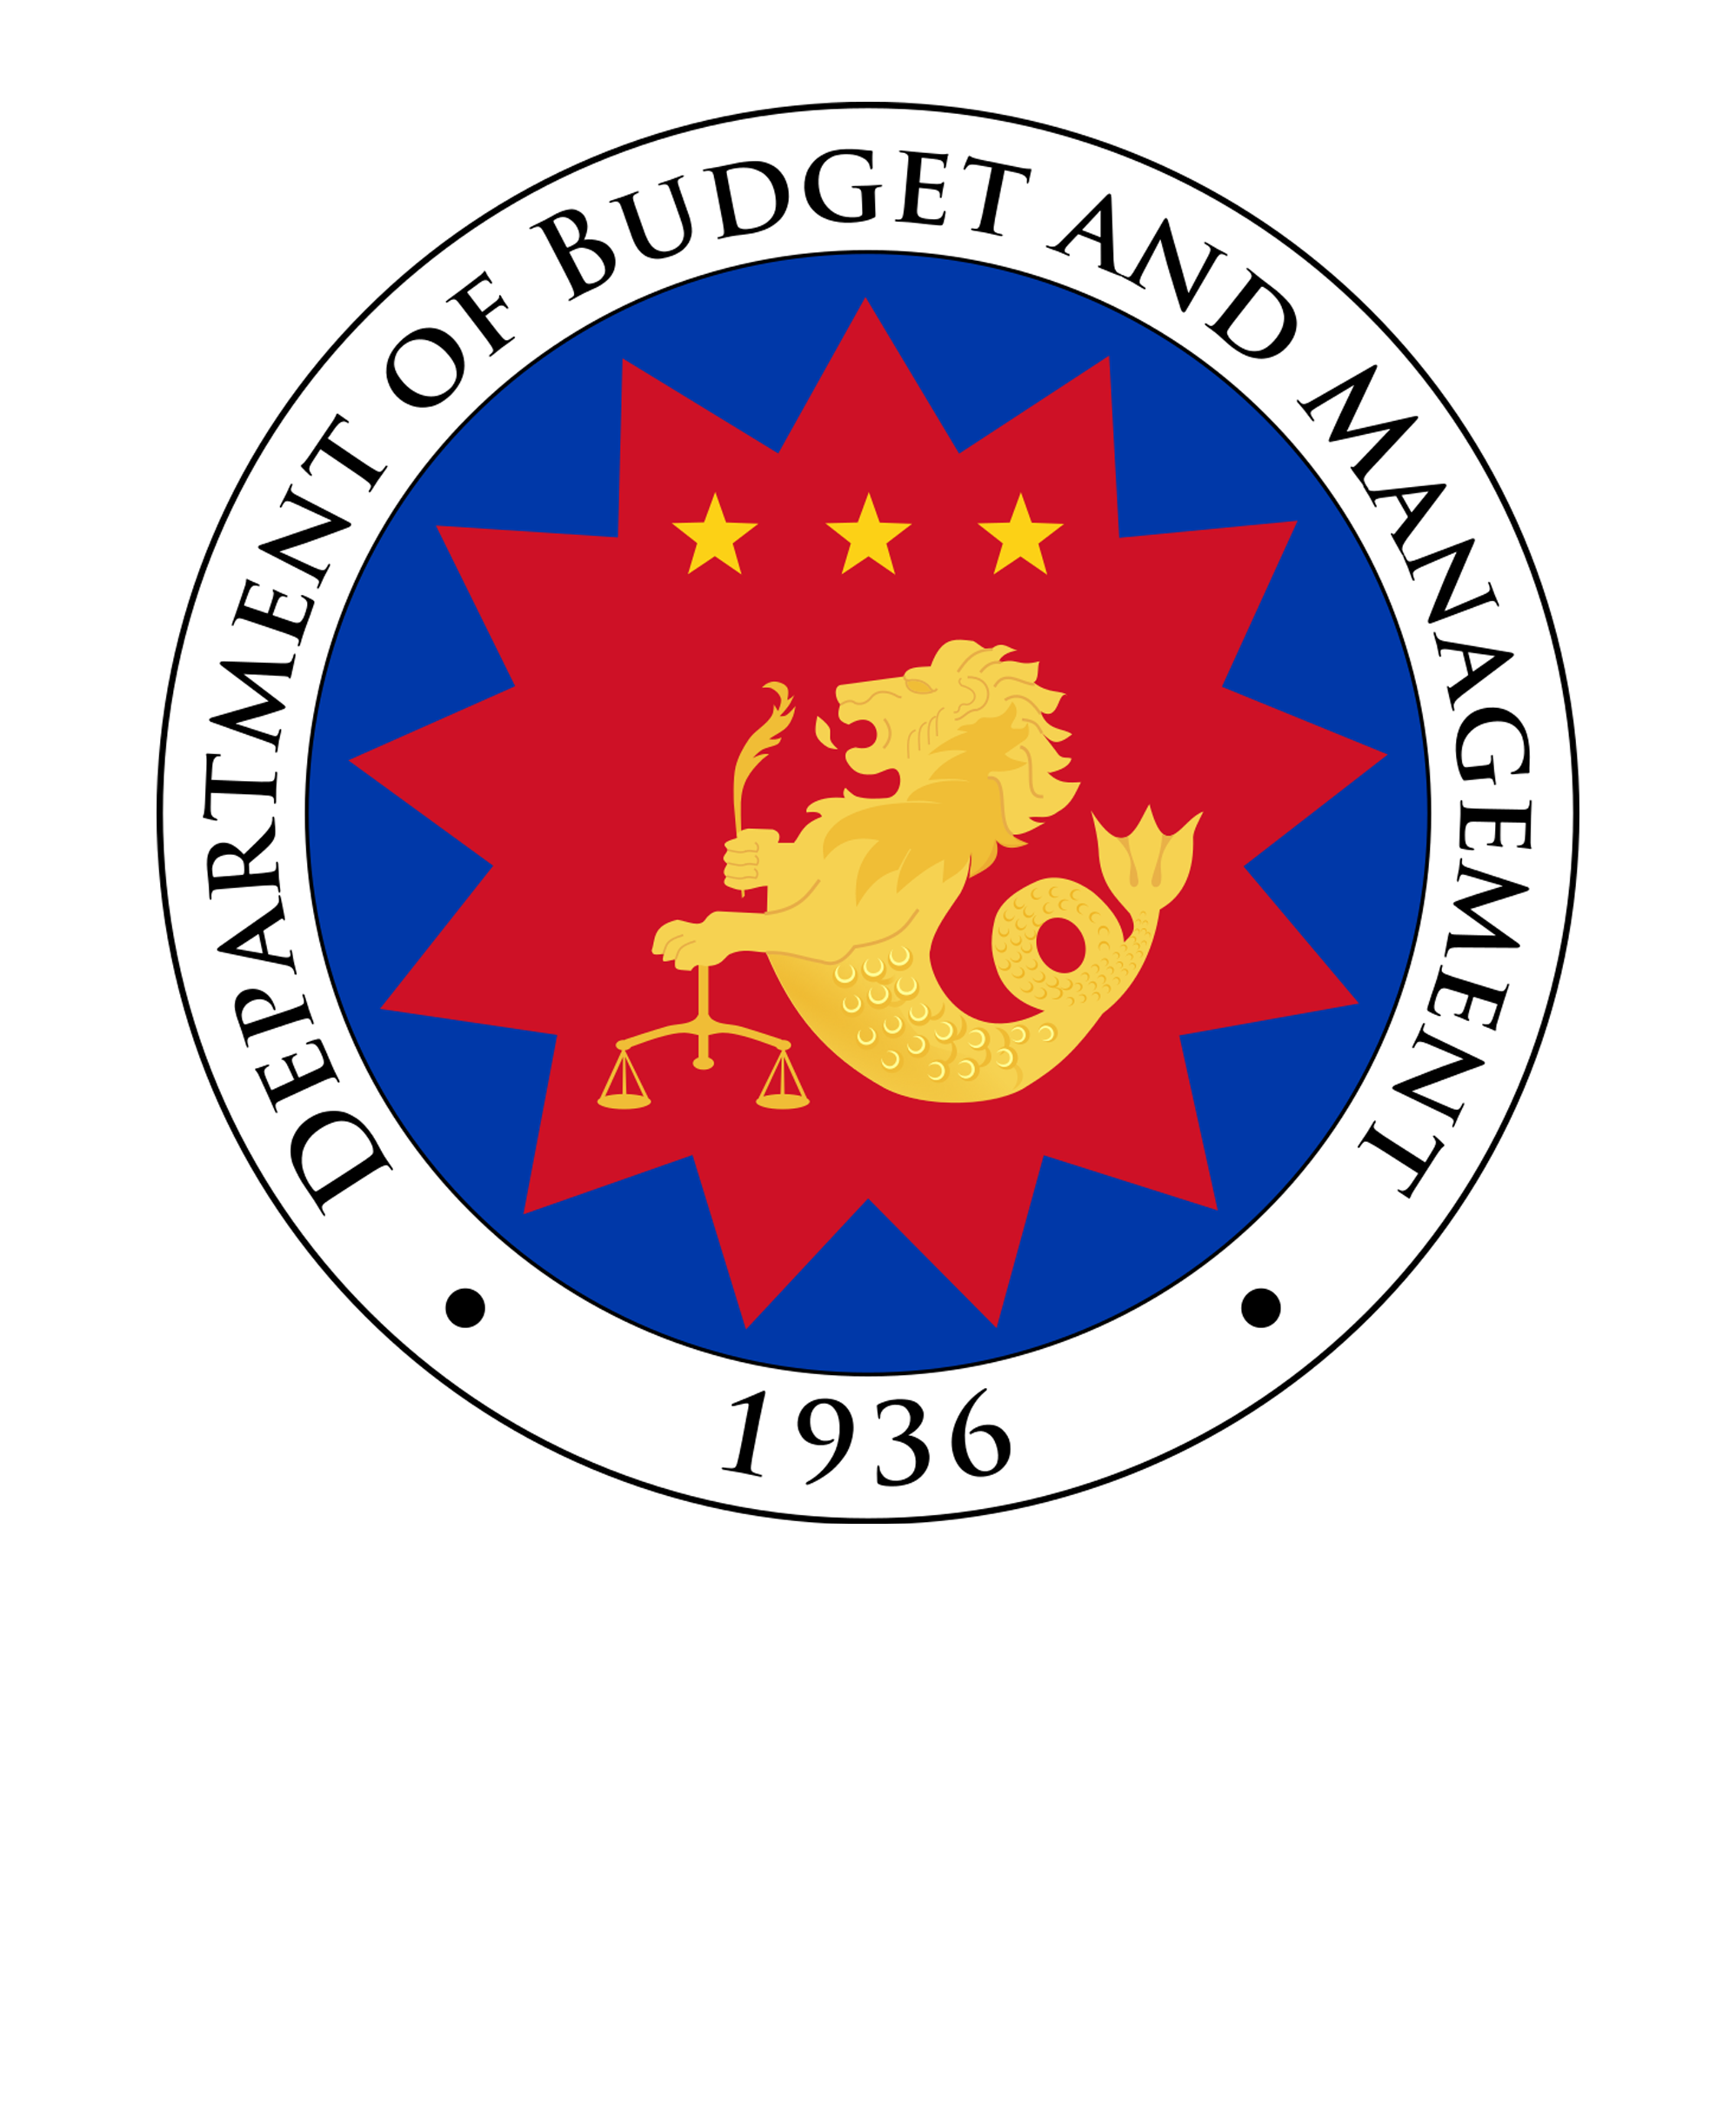 Department of Budget and Management